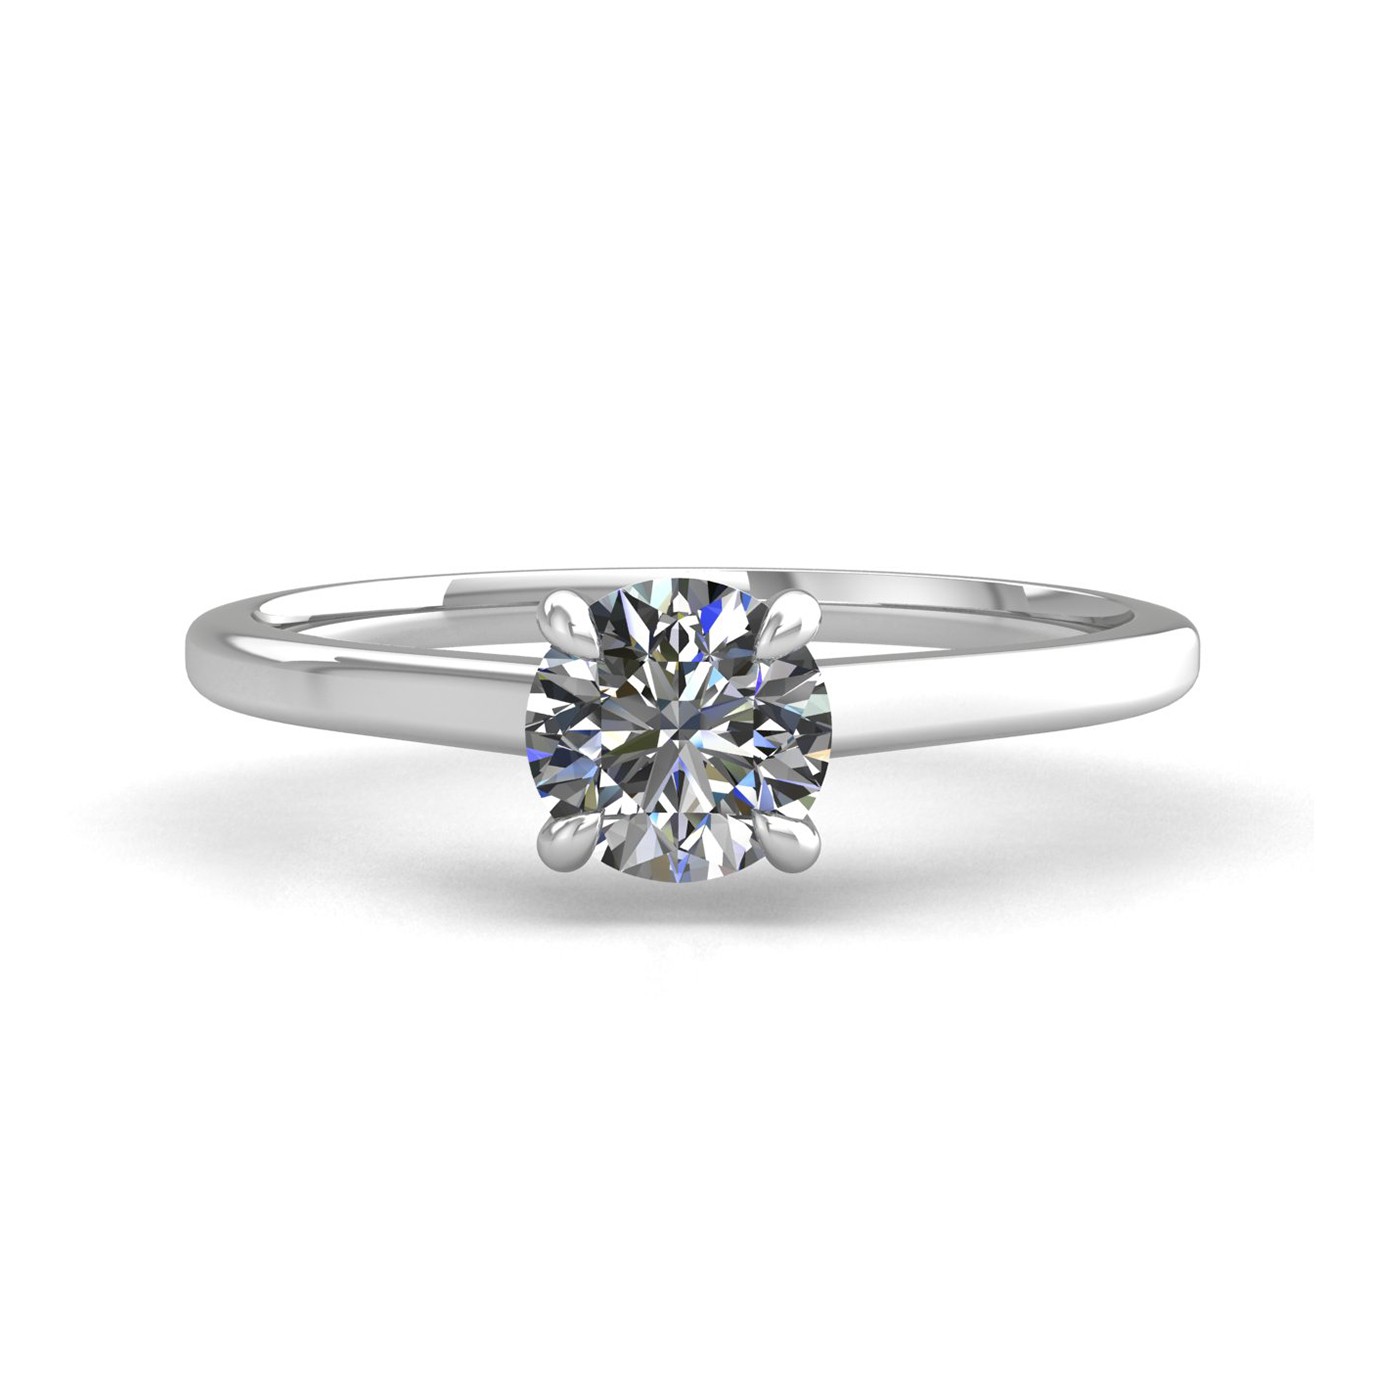 18k white gold 0,50 ct 4 prongs solitaire round cut diamond engagement ring with whisper thin band